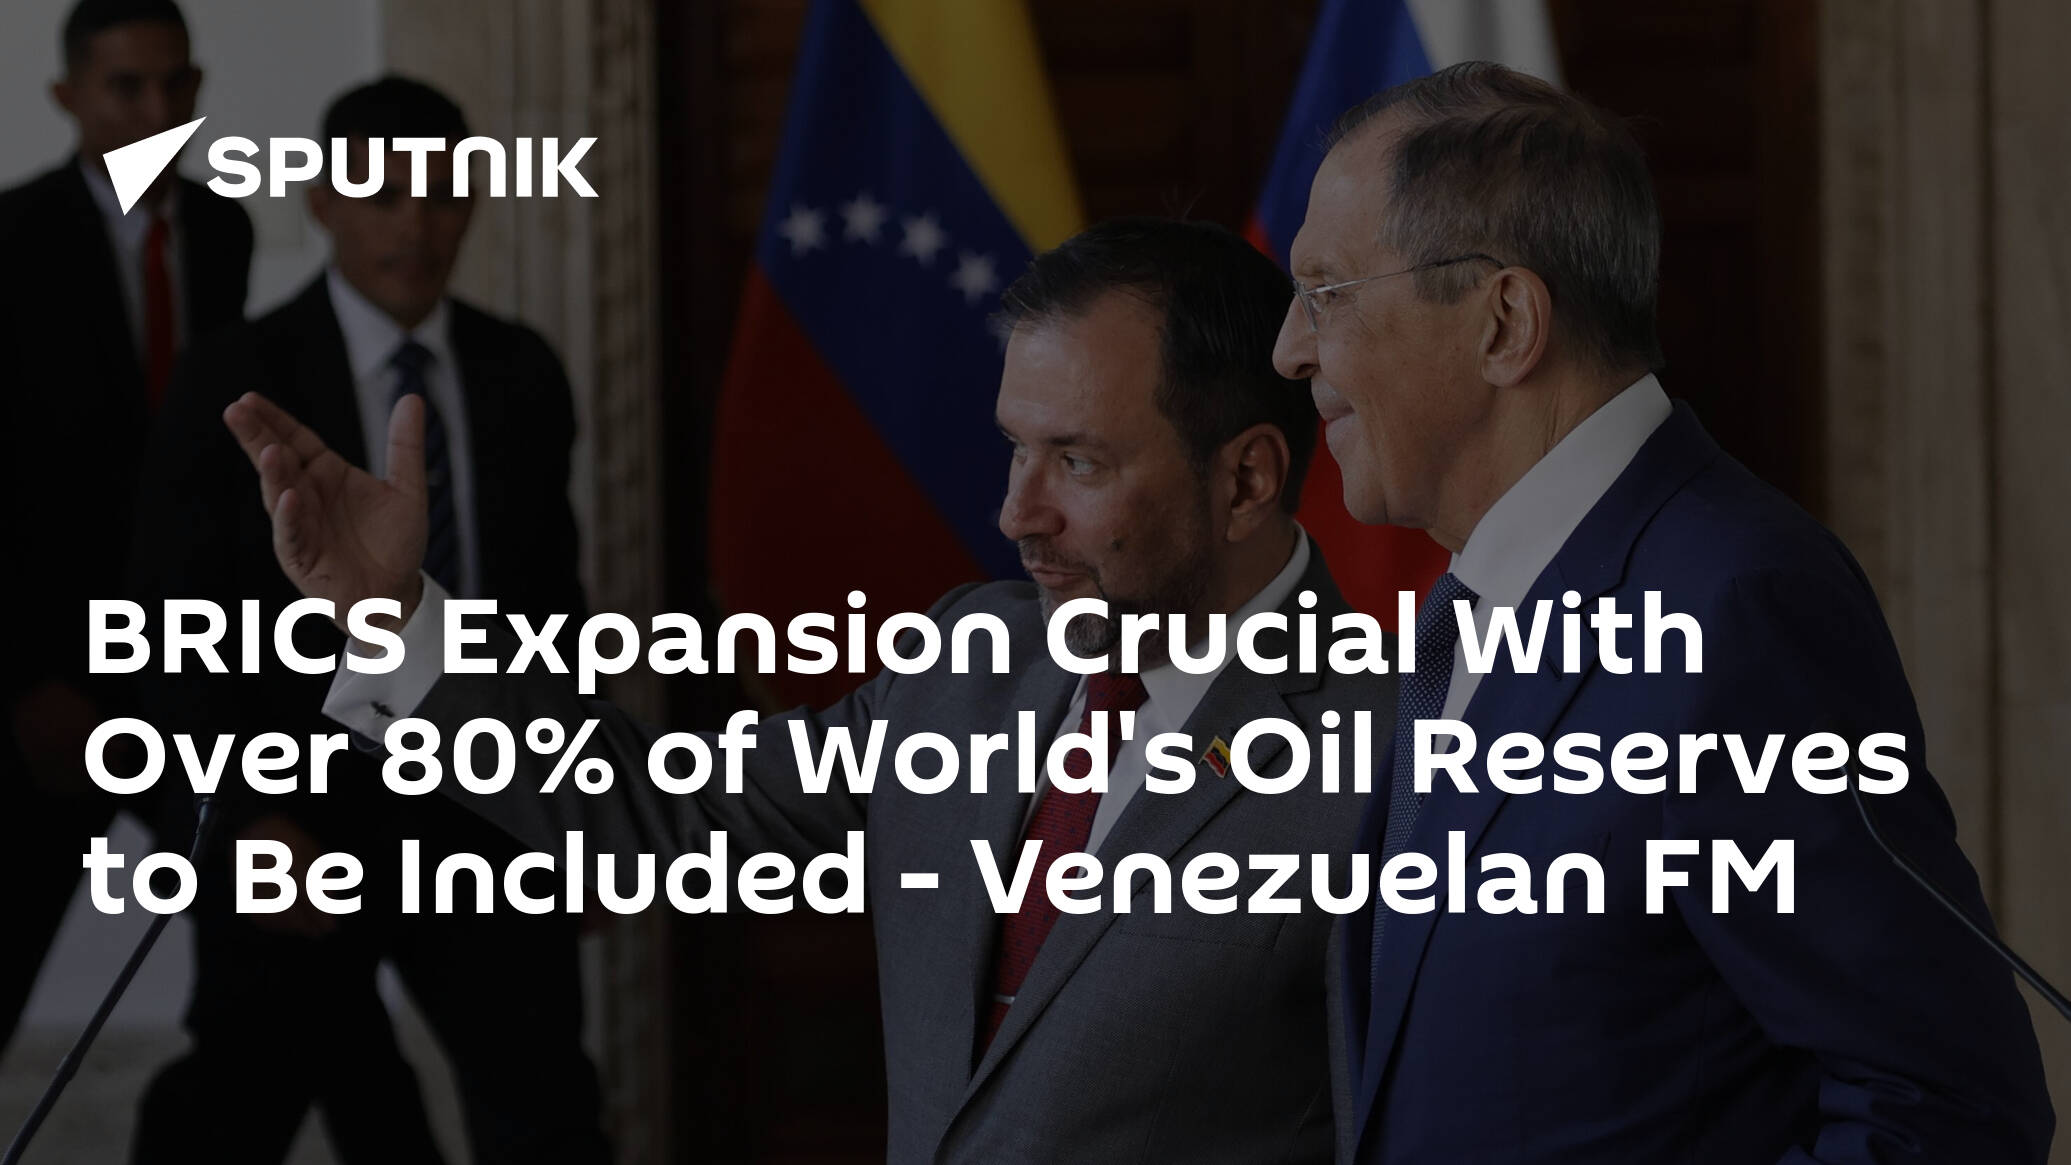 BRICS Expansion Crucial With Over 80% of World's Oil Reserves to Be Included – Venezuelan FM